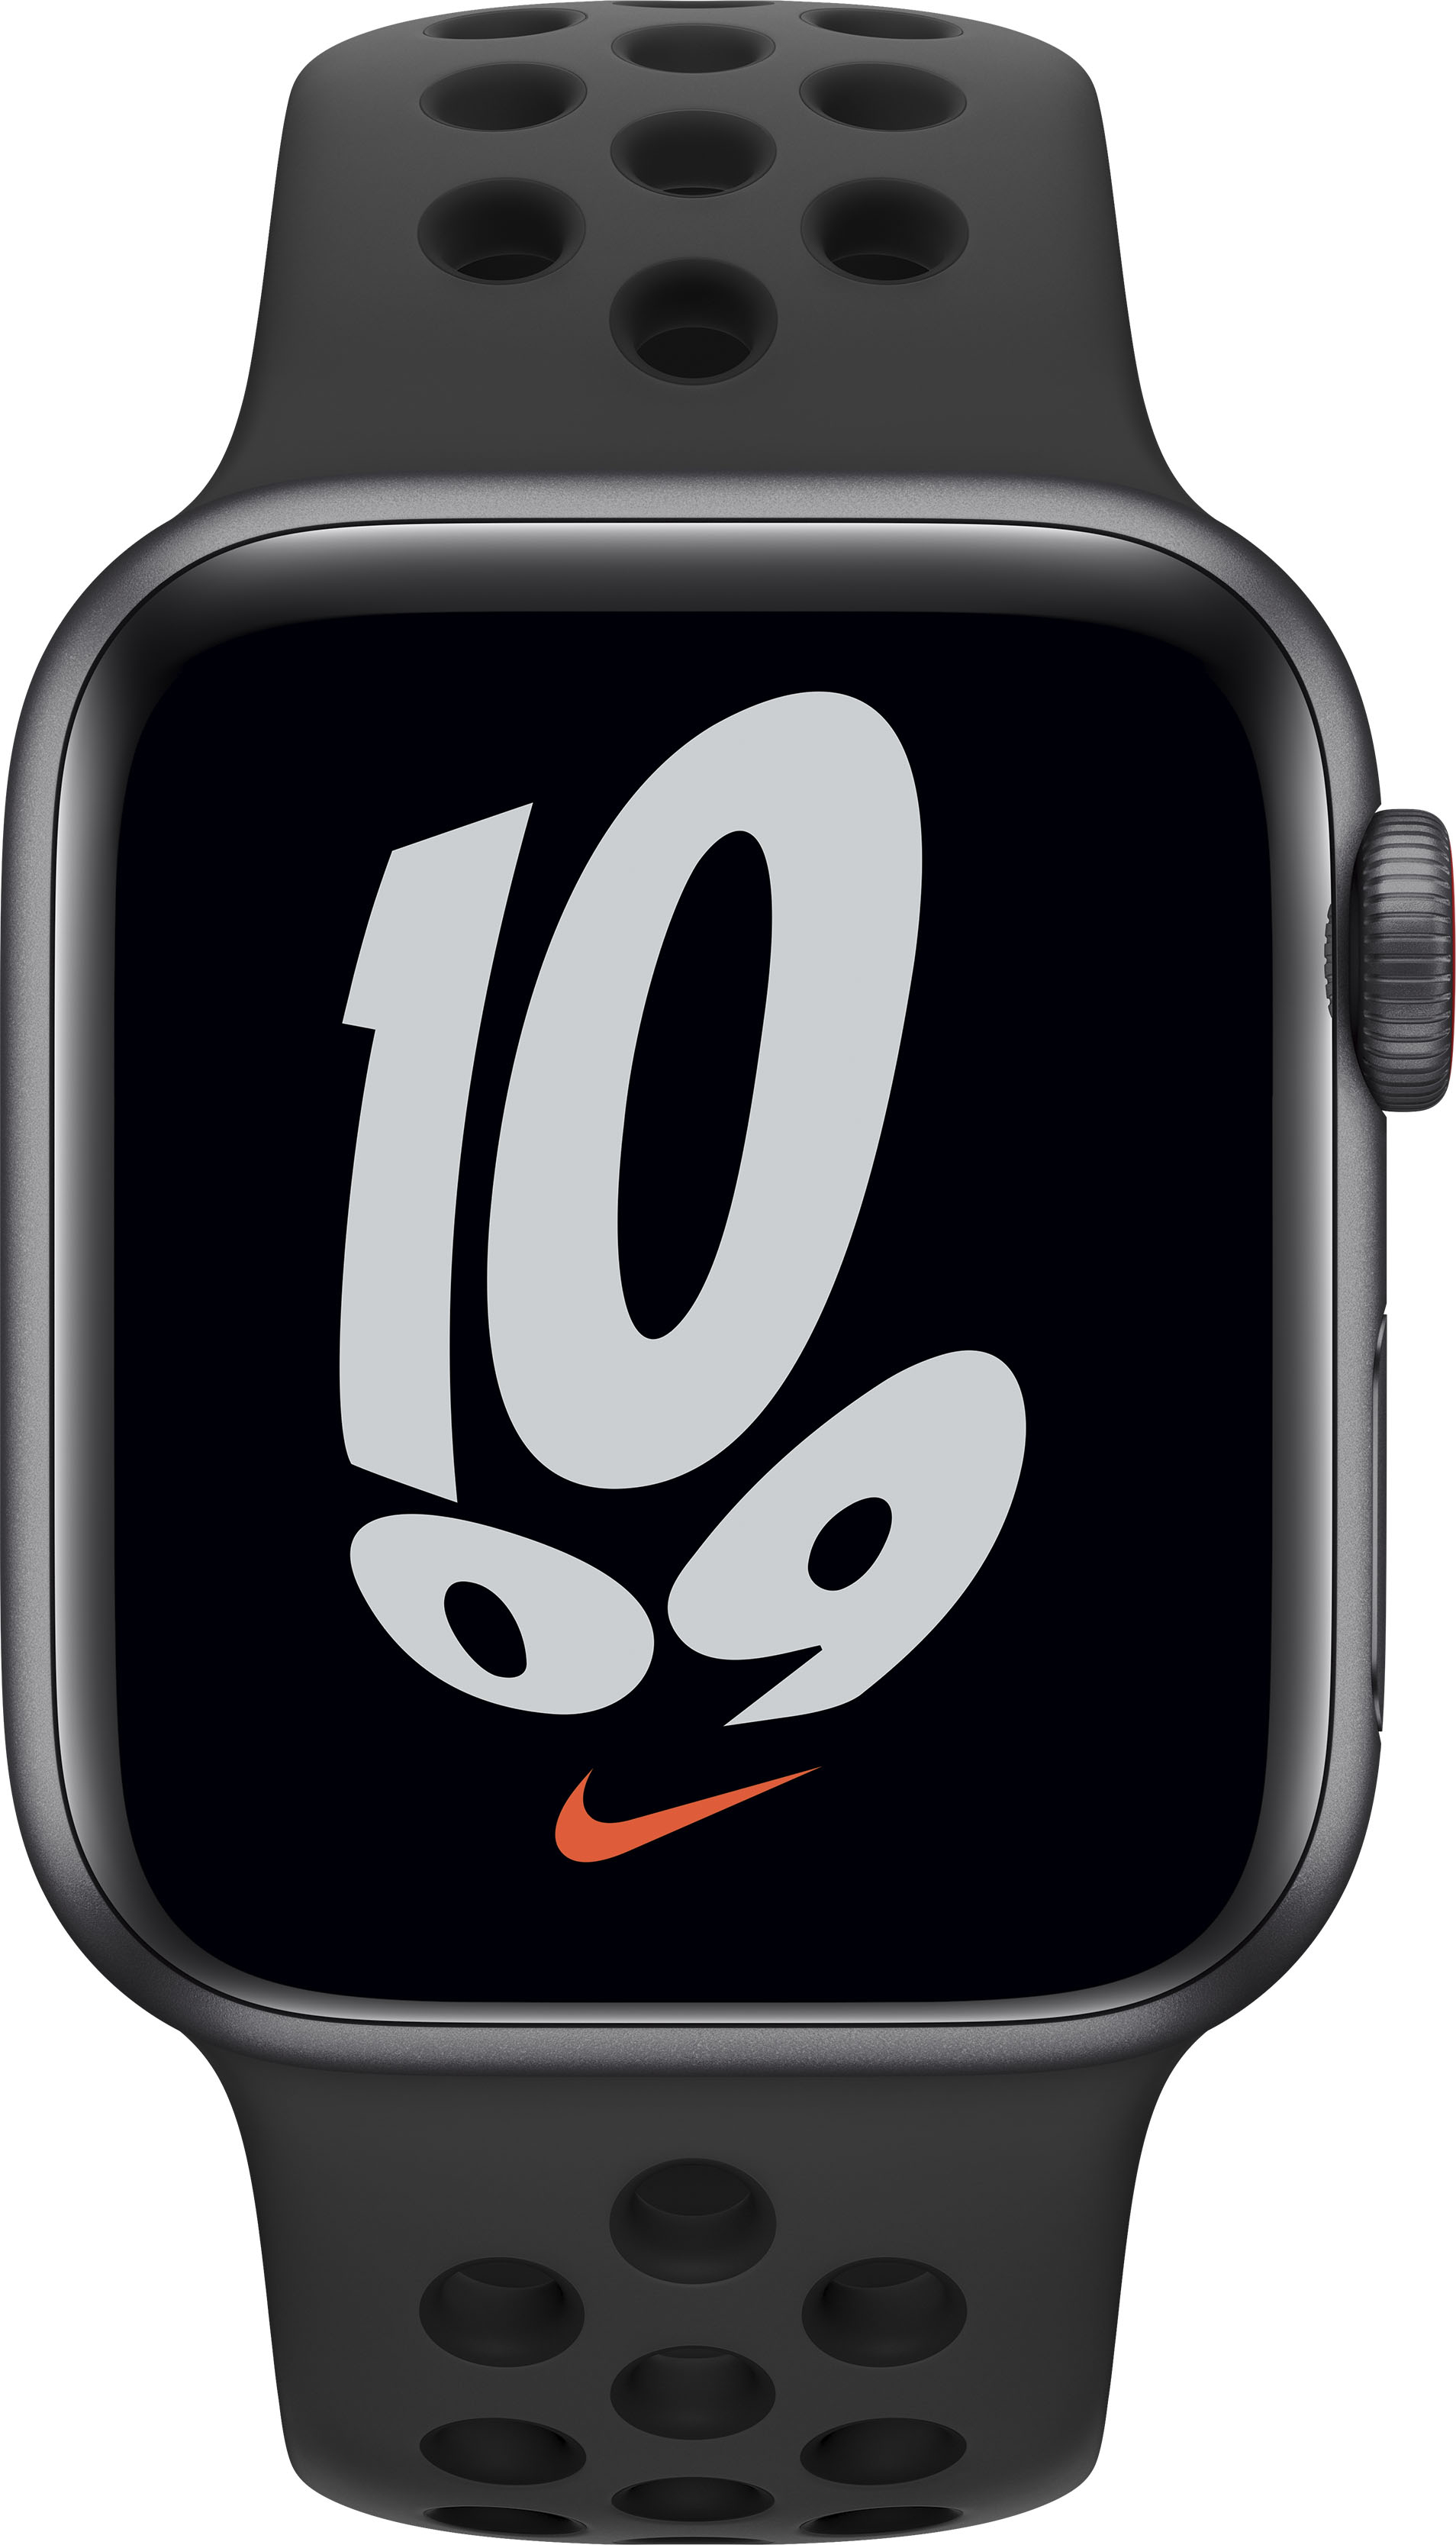 Apple Watch Nike SE (1st Generation, GPS) 40mm Space Gray Aluminum Case  with Nike Sport Band Space Gray MKQ33LL/A - Best Buy